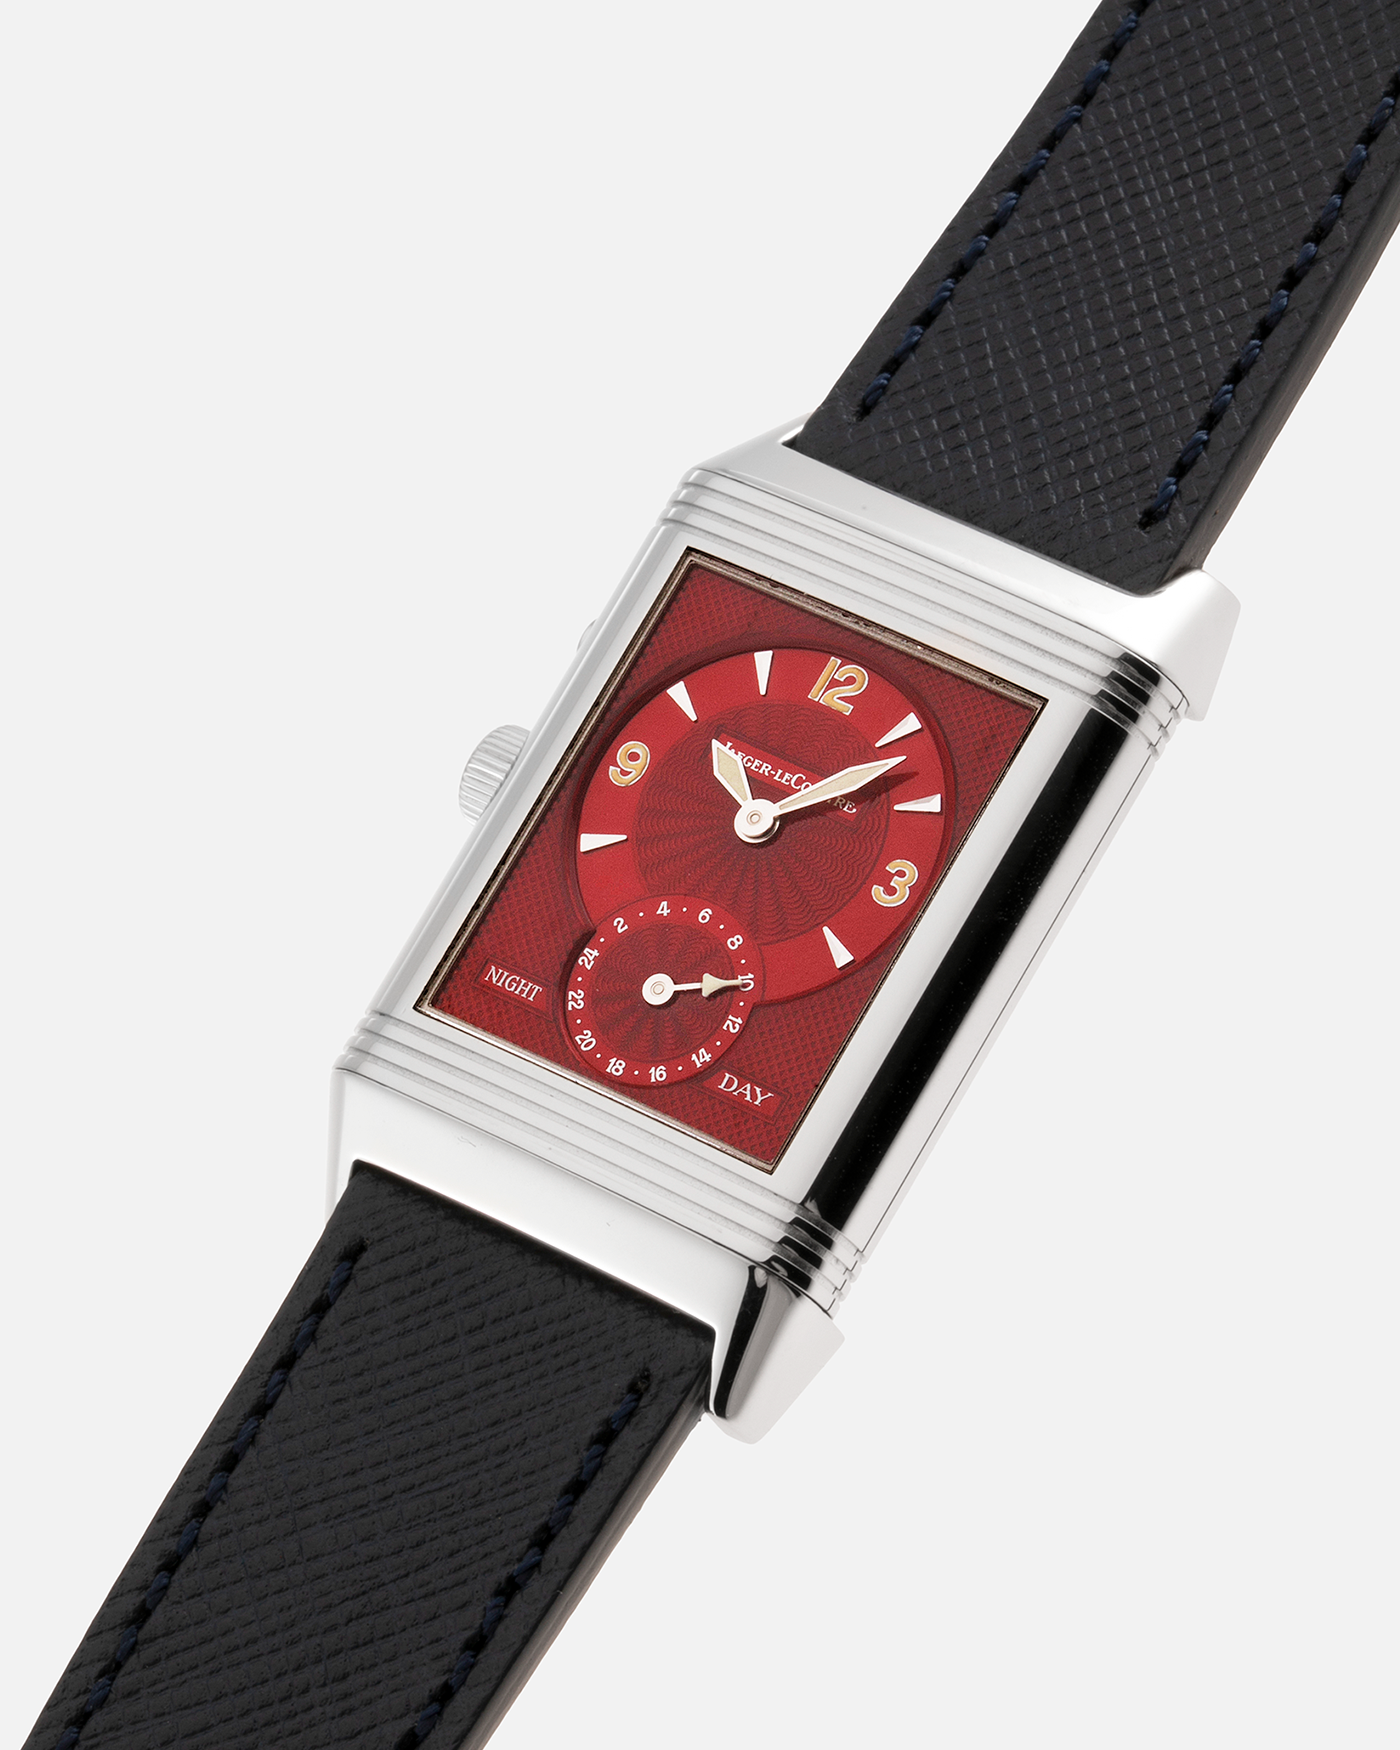 Brand: Jaeger-LeCoultre Year: 2000’s Model: Reverso Duoface Japan Edition Red, Ref. 270.1.54 Material: Stainless Steel Movement: JLC Cal. 854, Manual-Wind Case Diameter: 42 x 26mm Bracelet/Strap: Molequin Black Textured Calf with Stainless Steel Tang Buckle